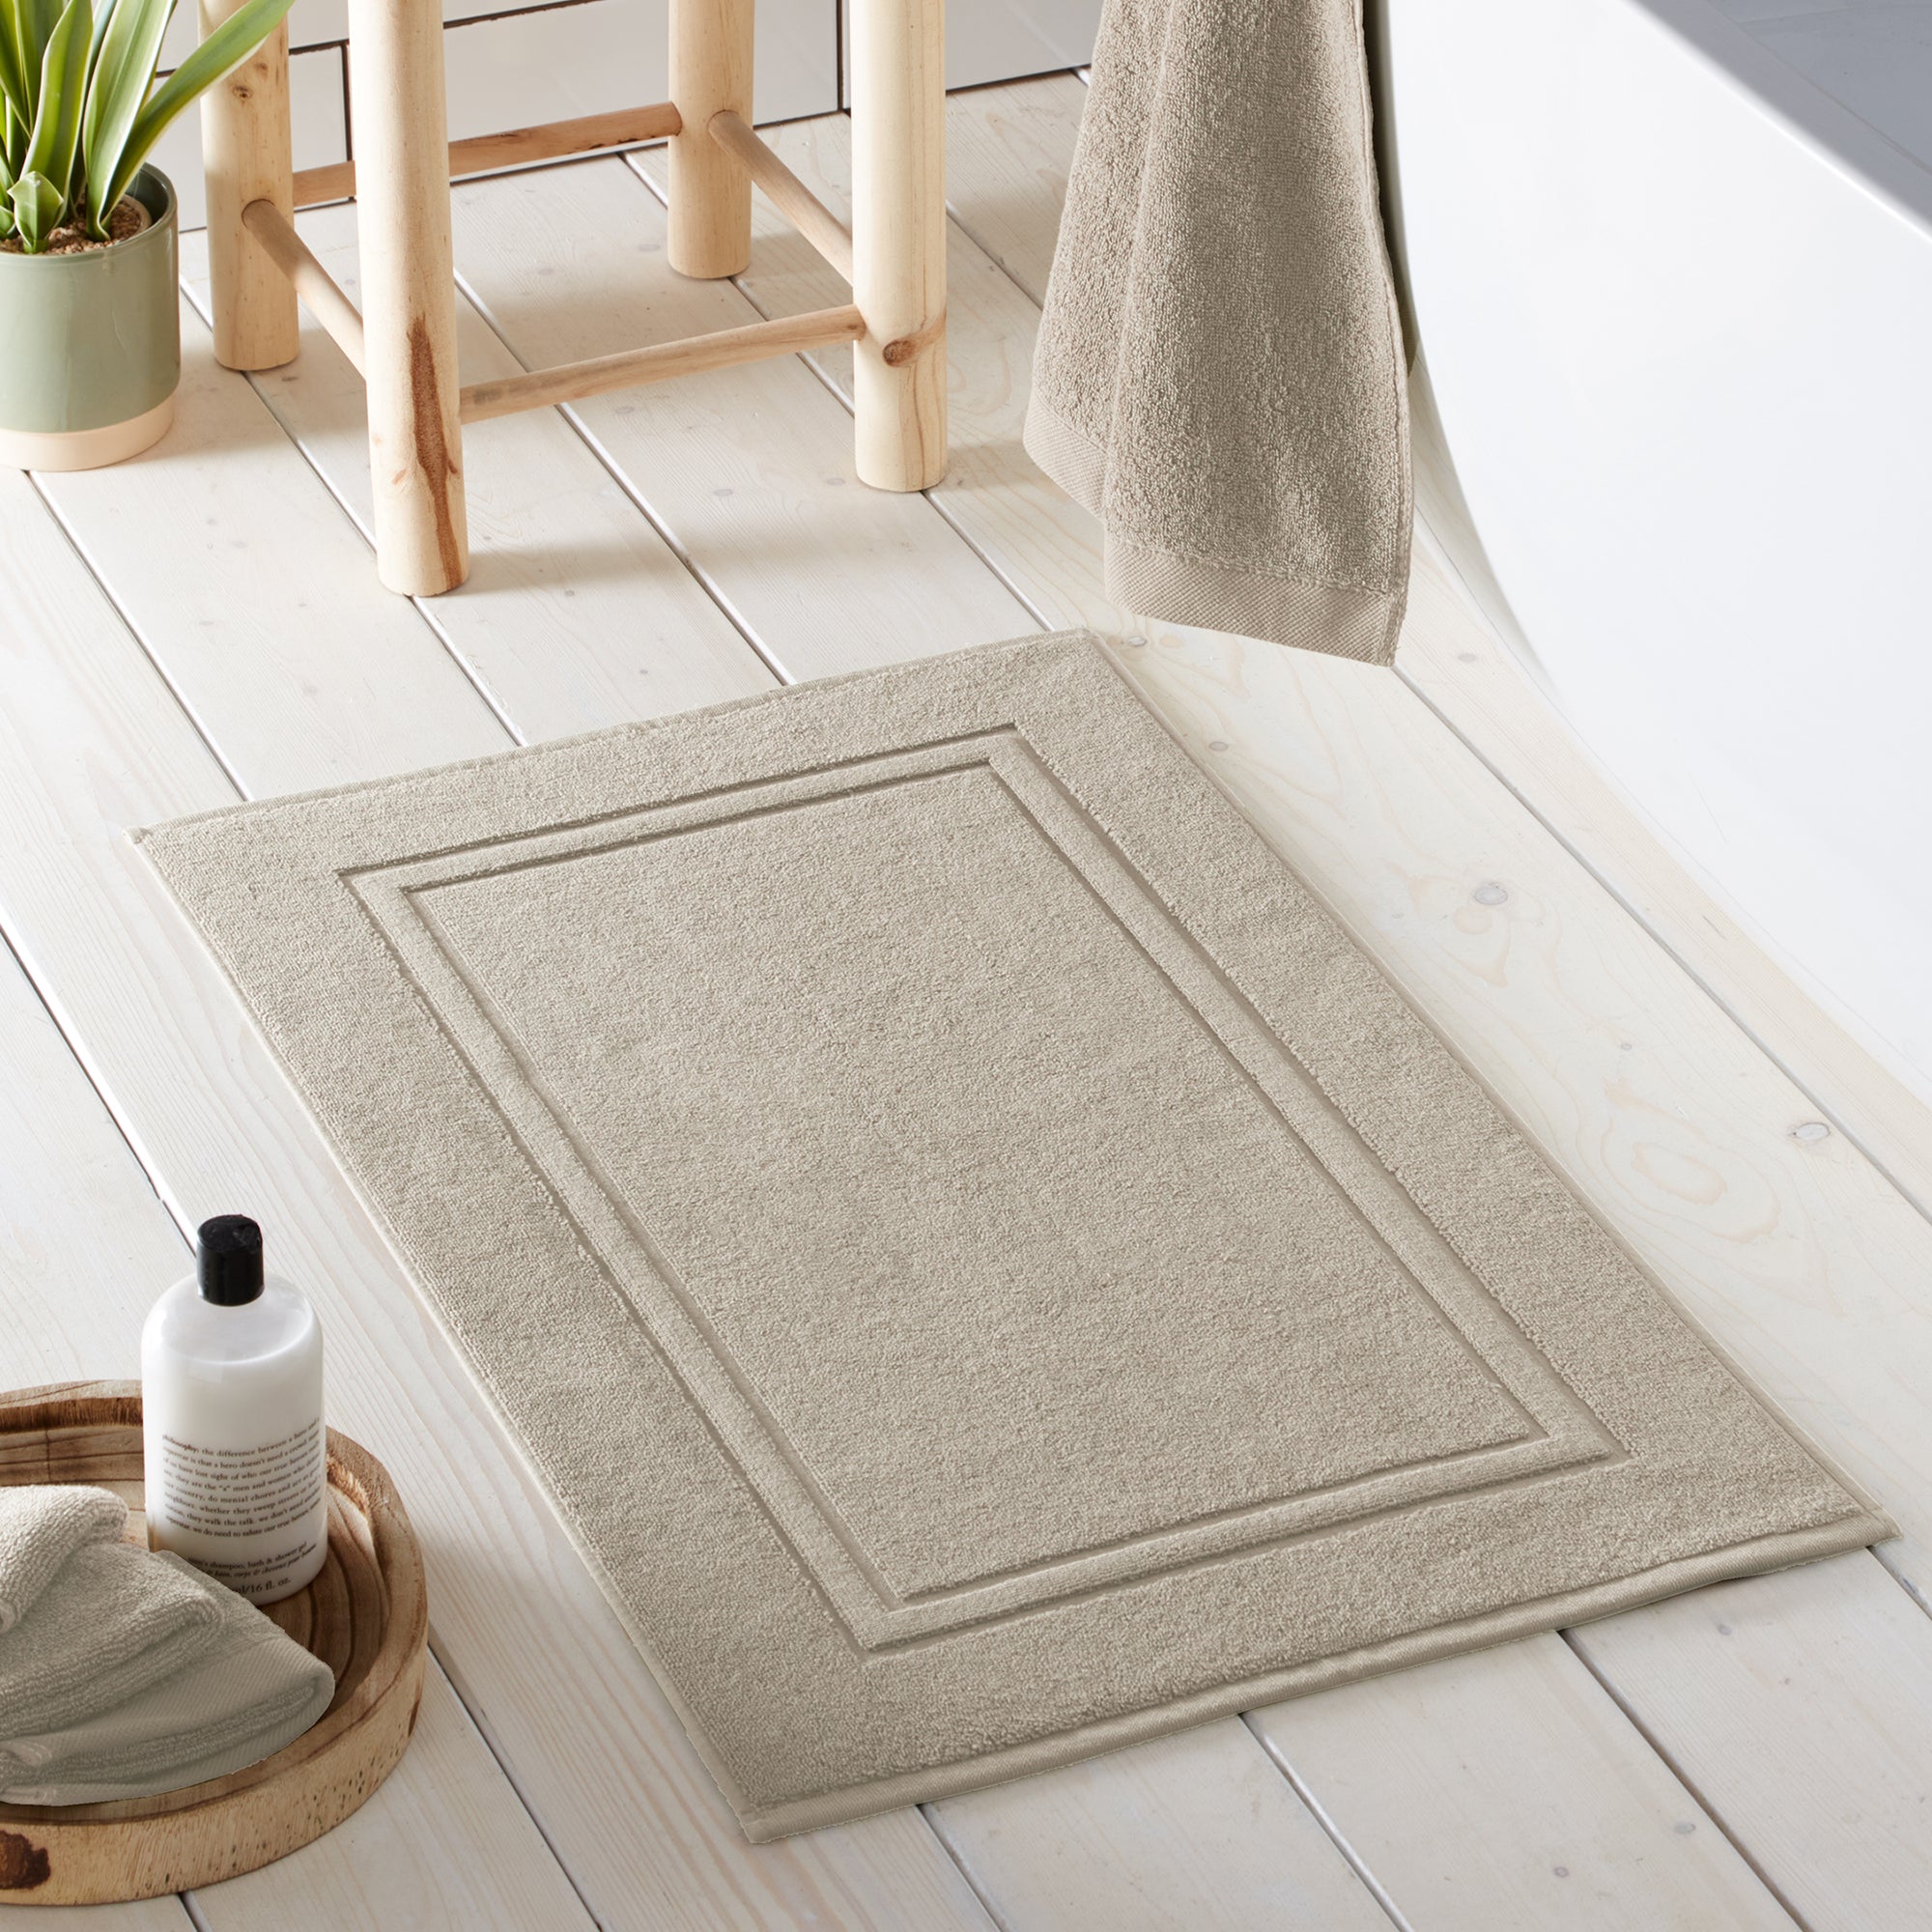 Bath Mat Abode Eco by Drift Home in Natural